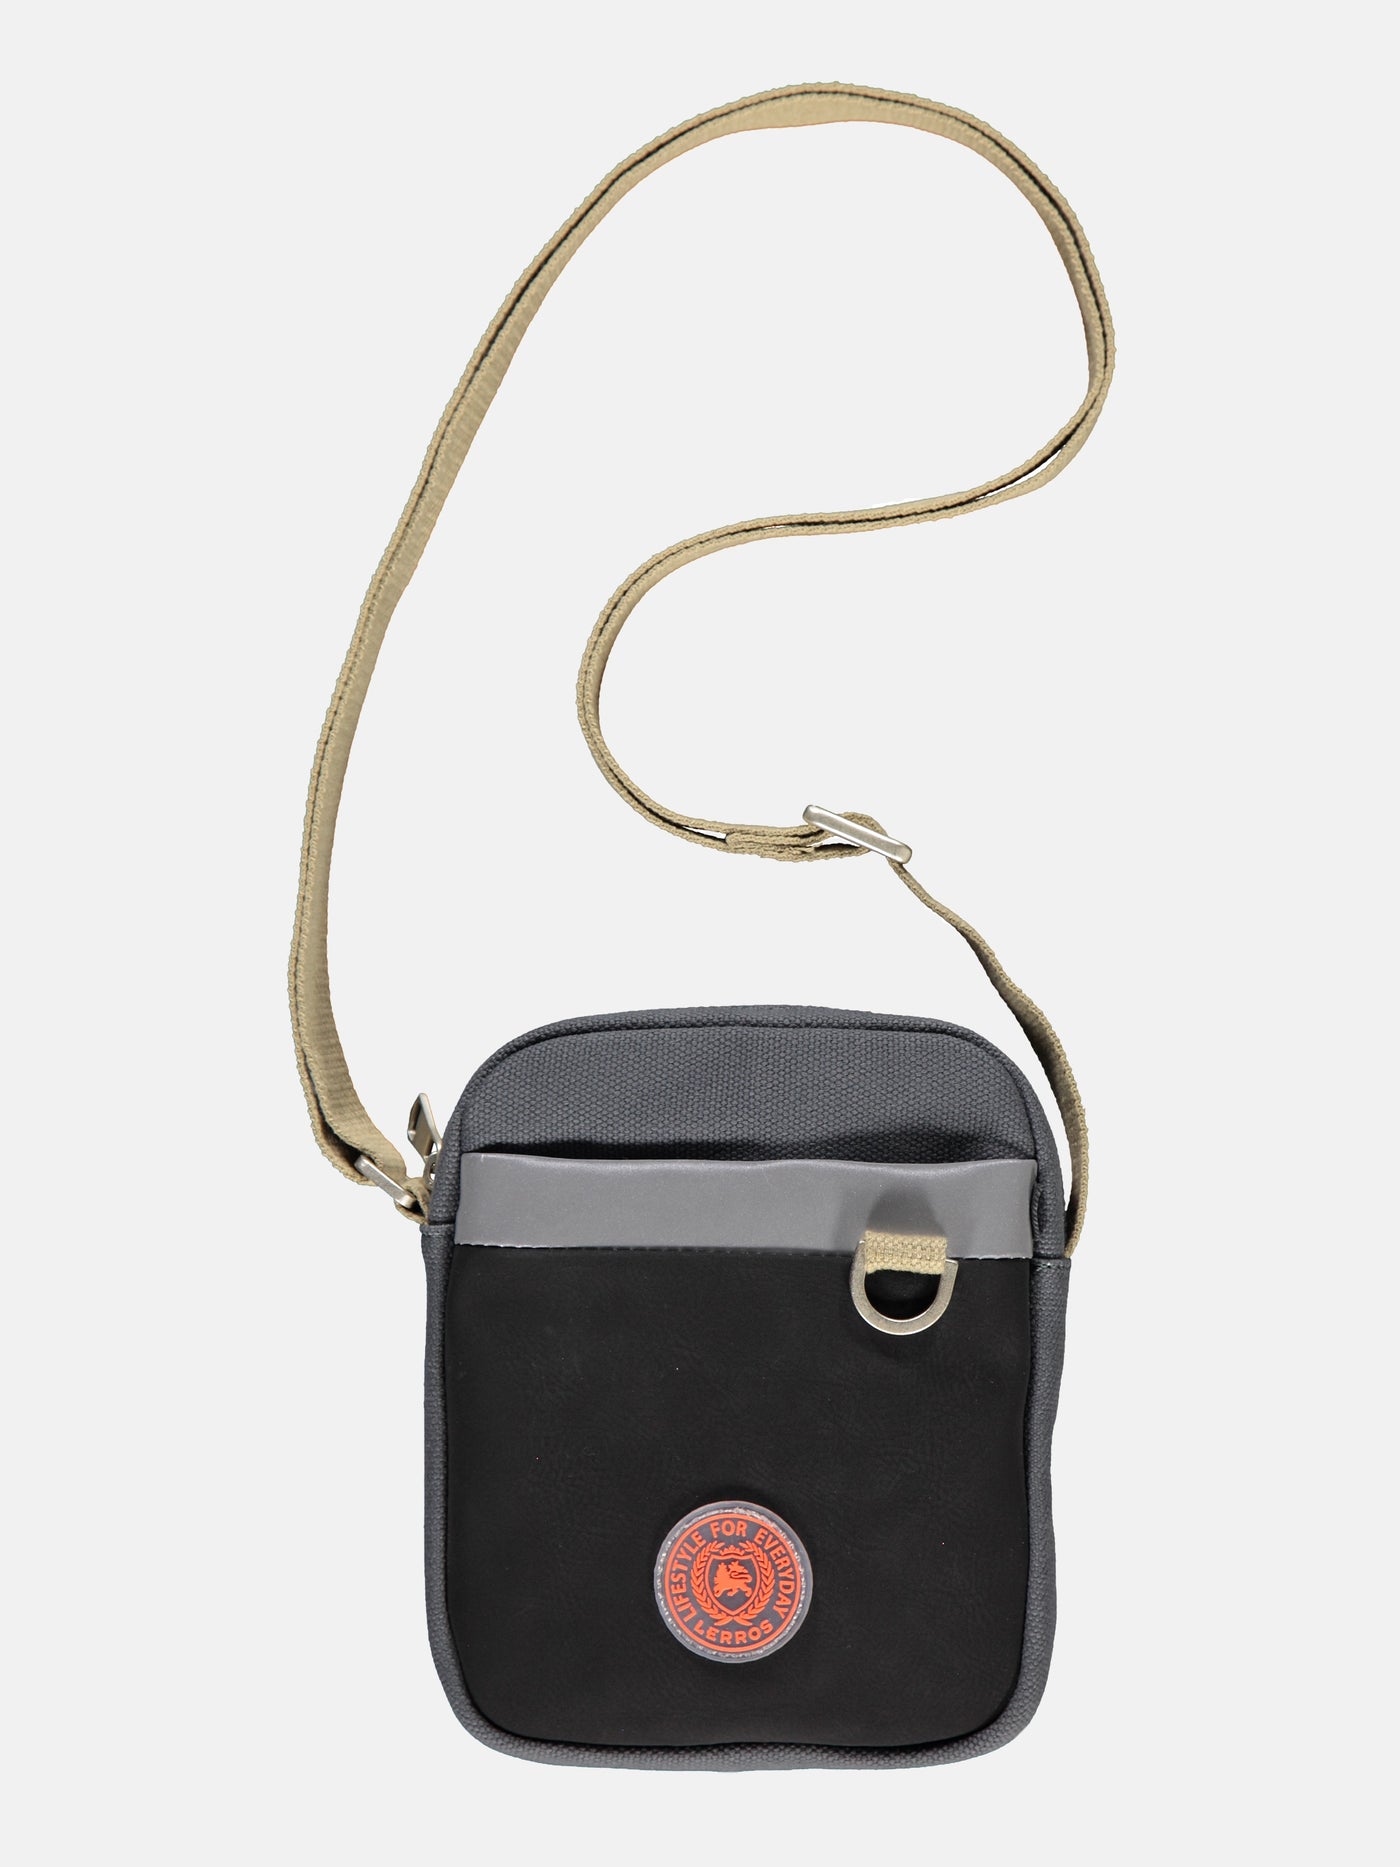 Small crossbody bag with reflective details